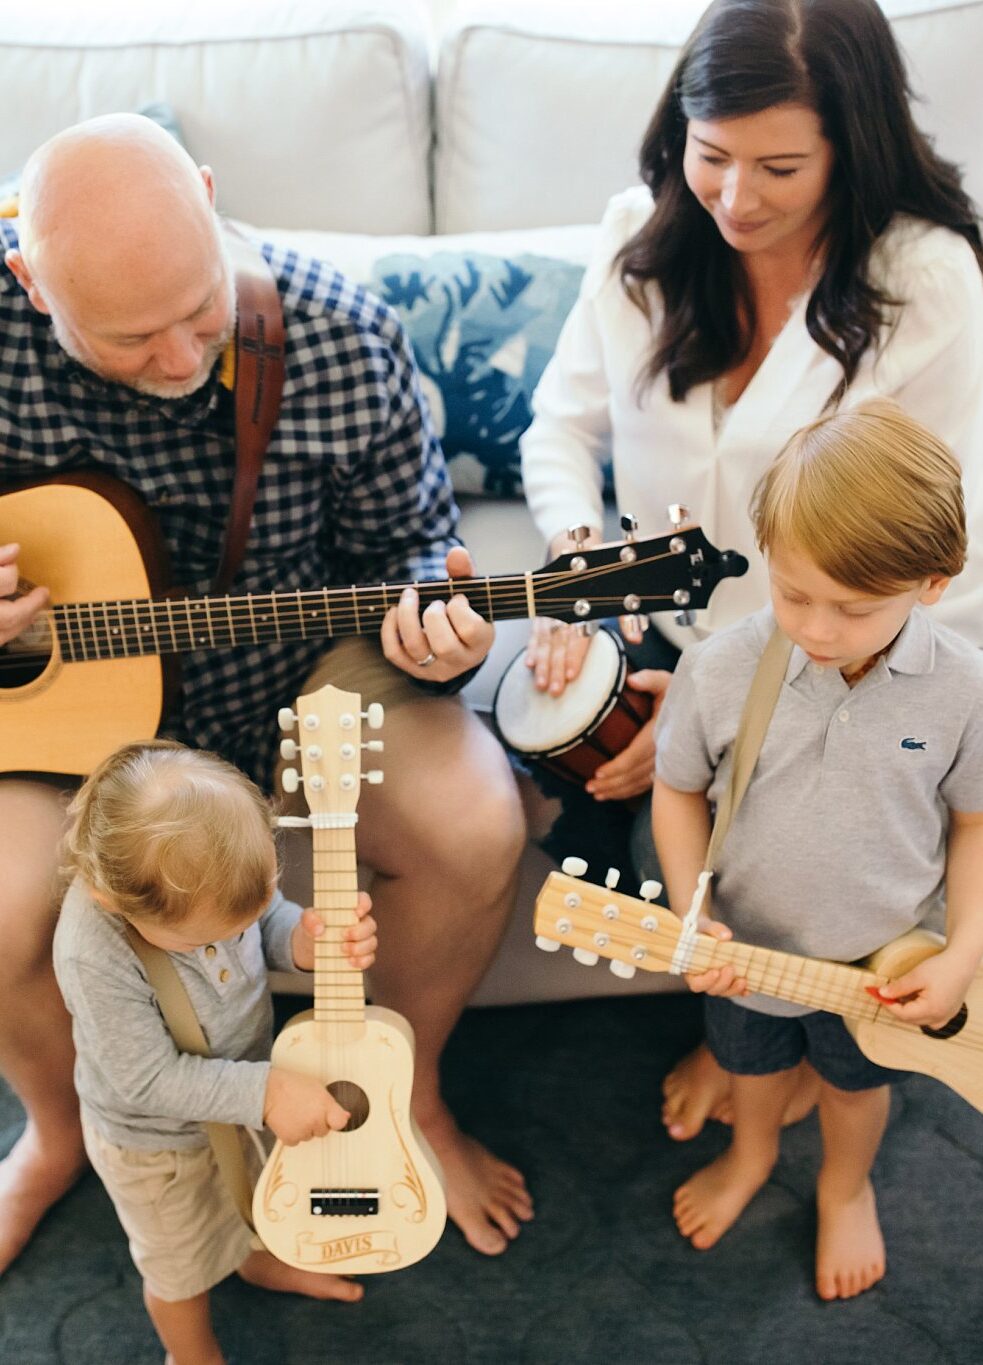 Family of 4 with 2 little boys playing instruments in living room